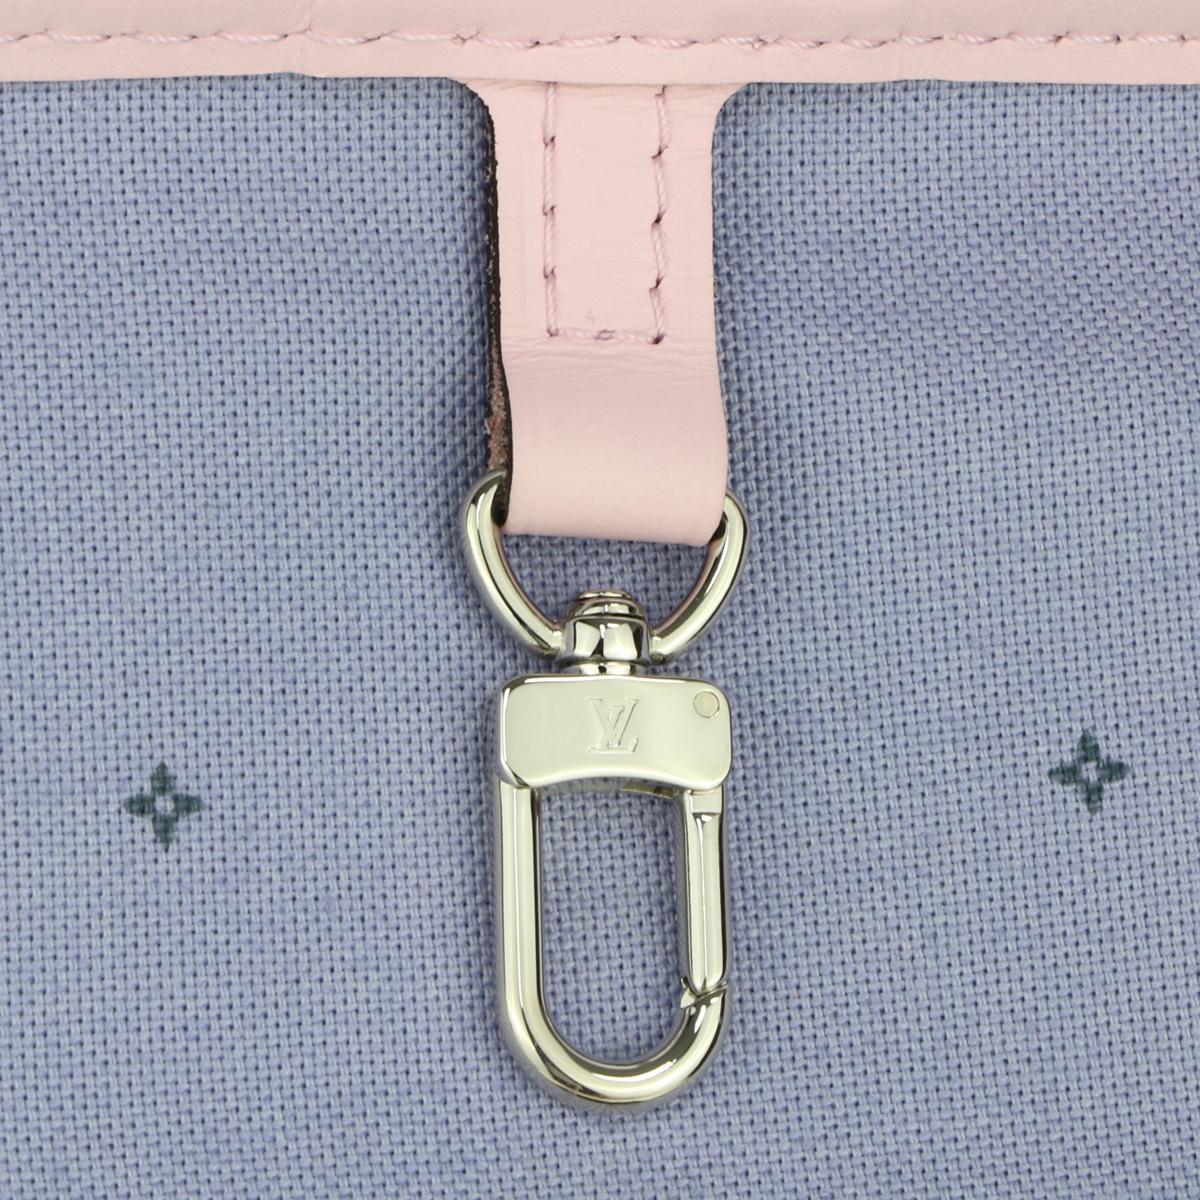 Louis Vuitton Escale Neverfull MM Bag in Pastel 2020 Limited Edition For Sale 7